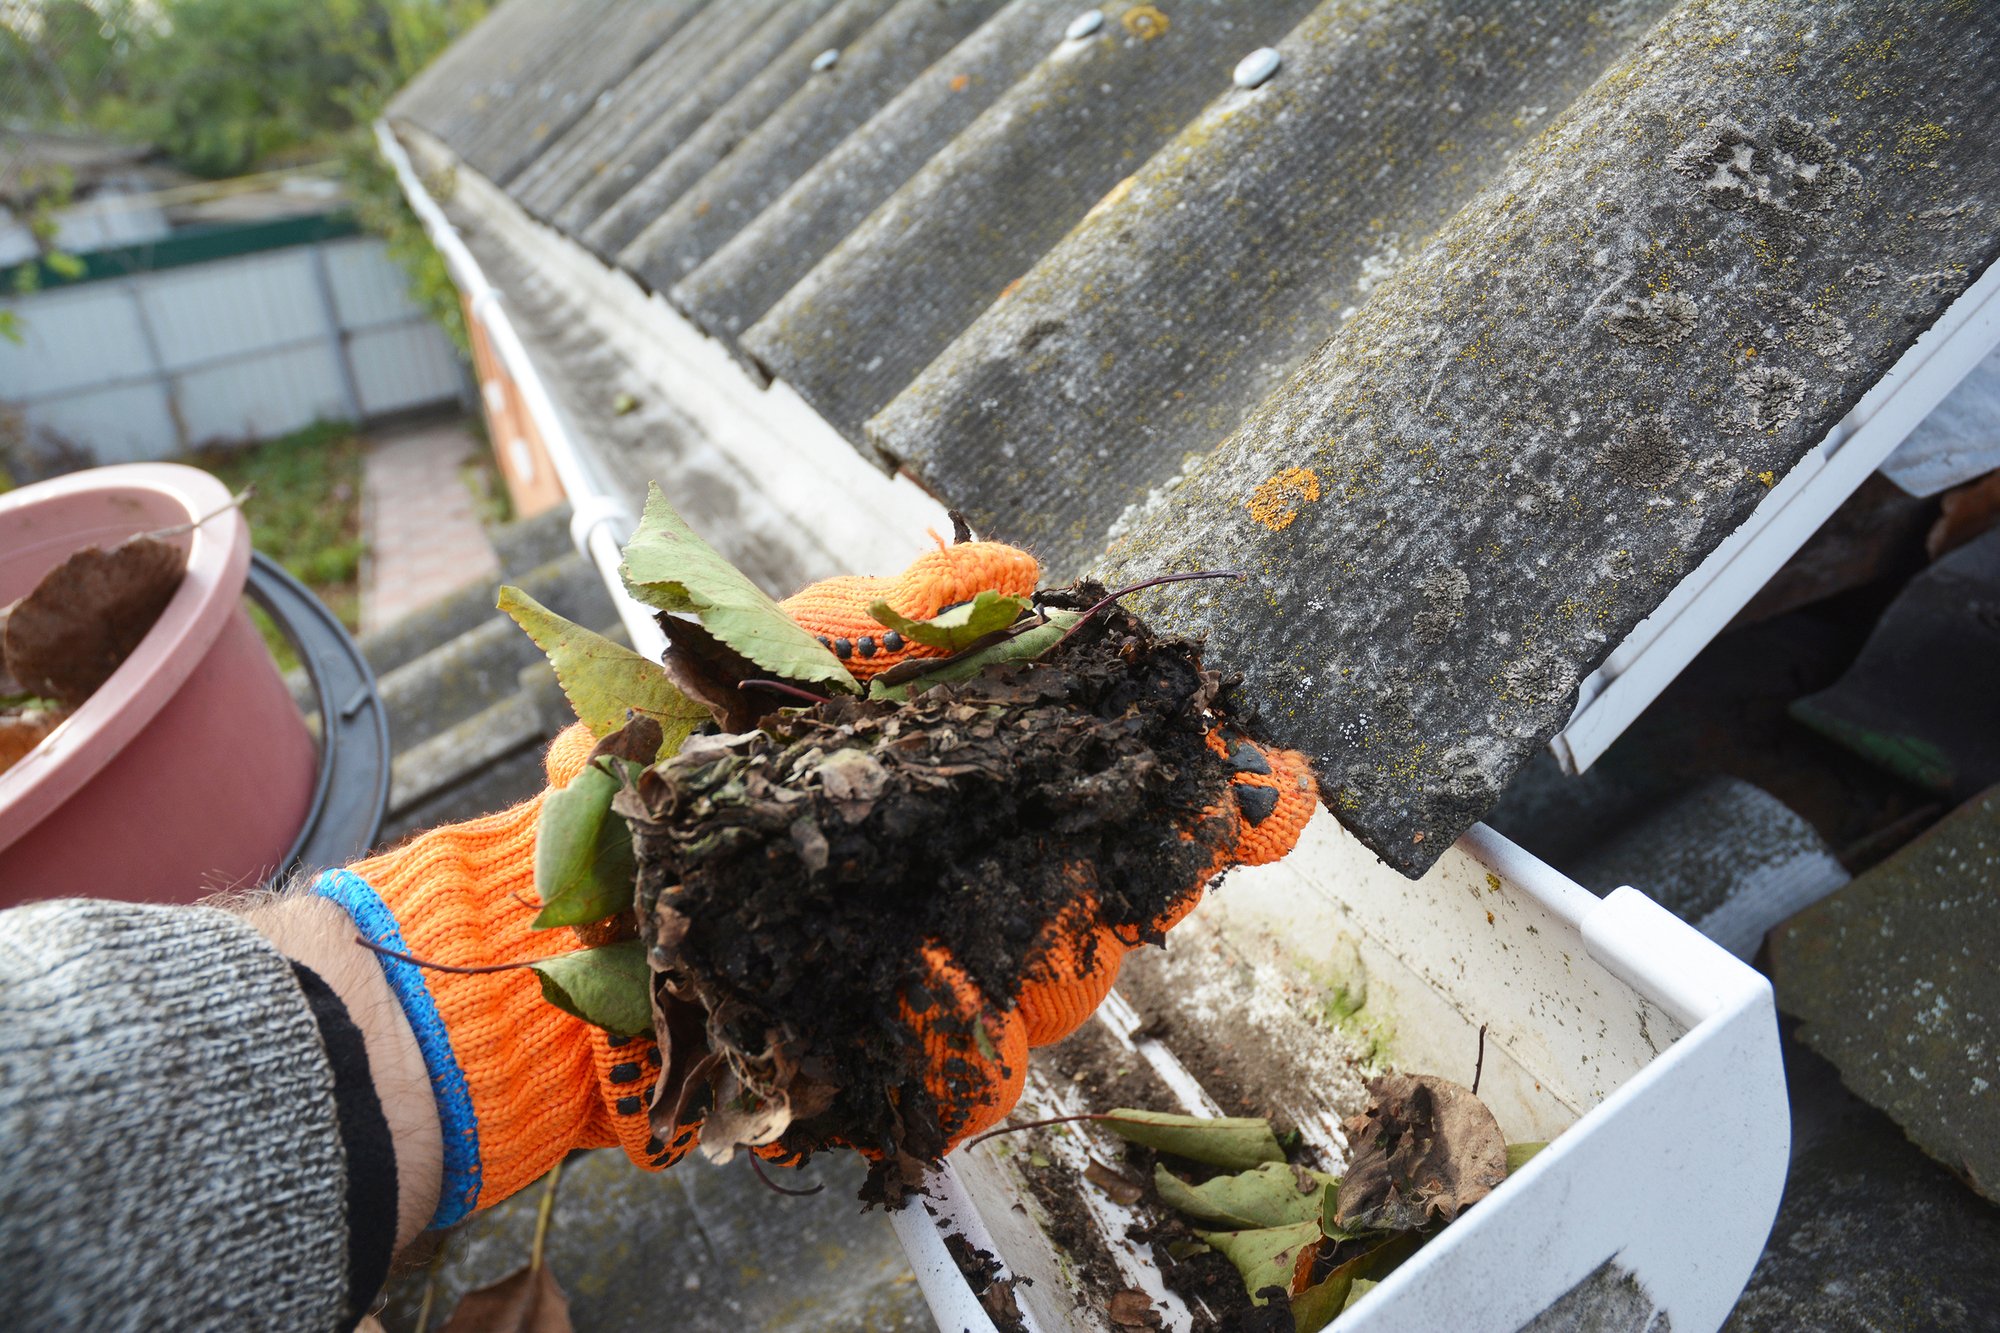 Rain Gutter Cleaning. Scooping leaves from gutter. Clean and Repair Rain Gutters